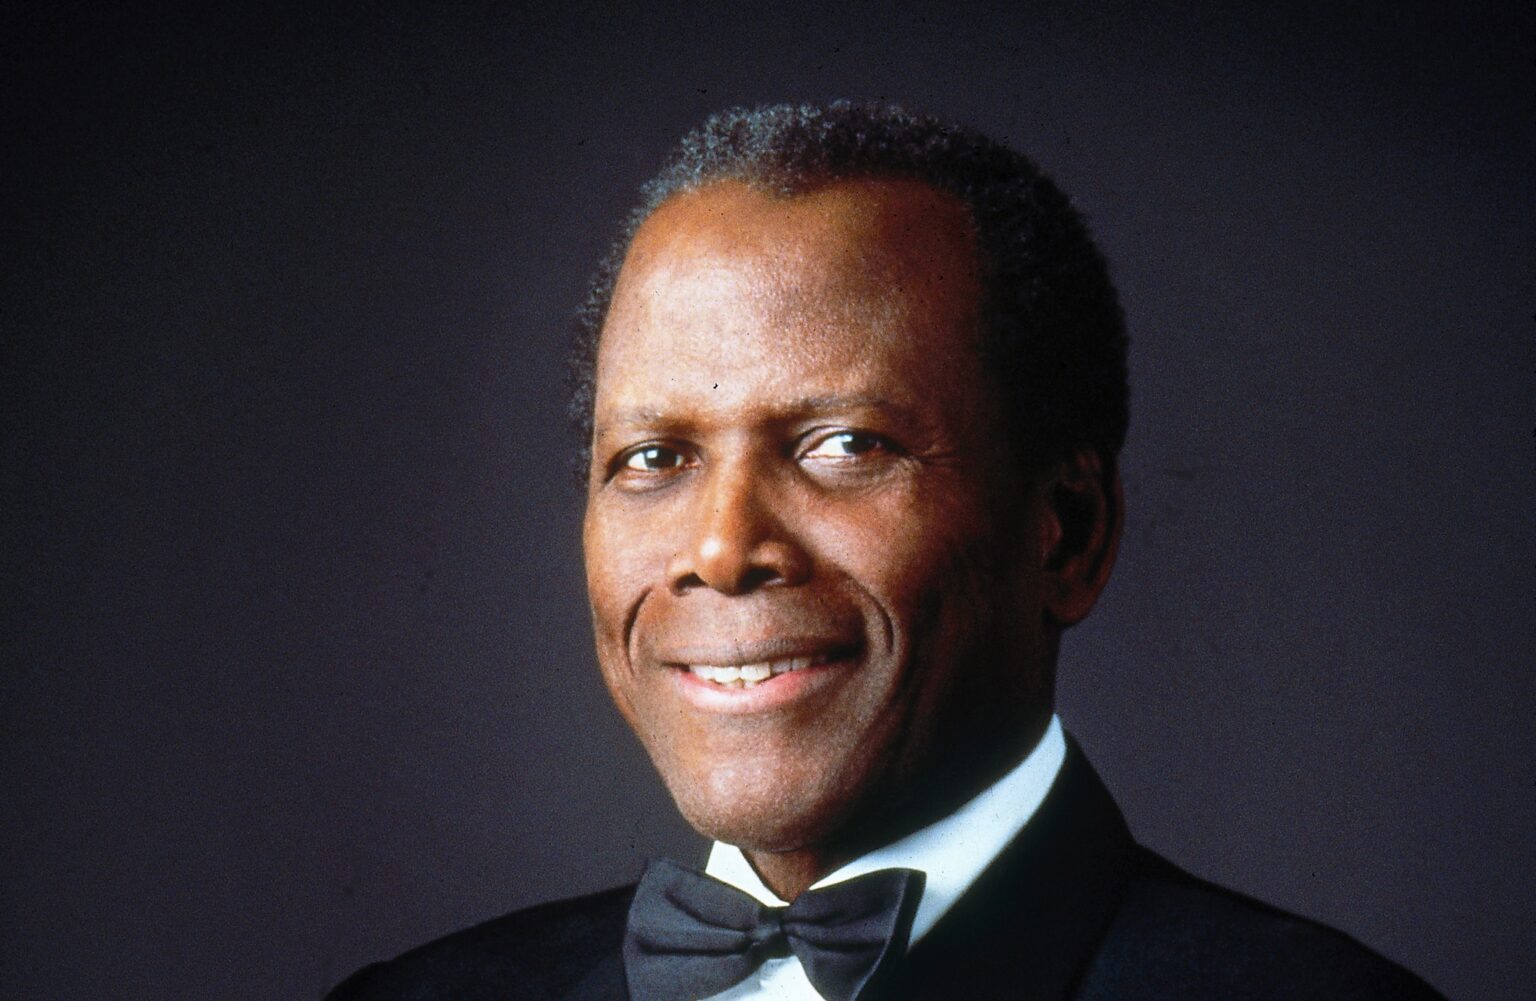 Movie Icon Sidney Poitier passes away at 94